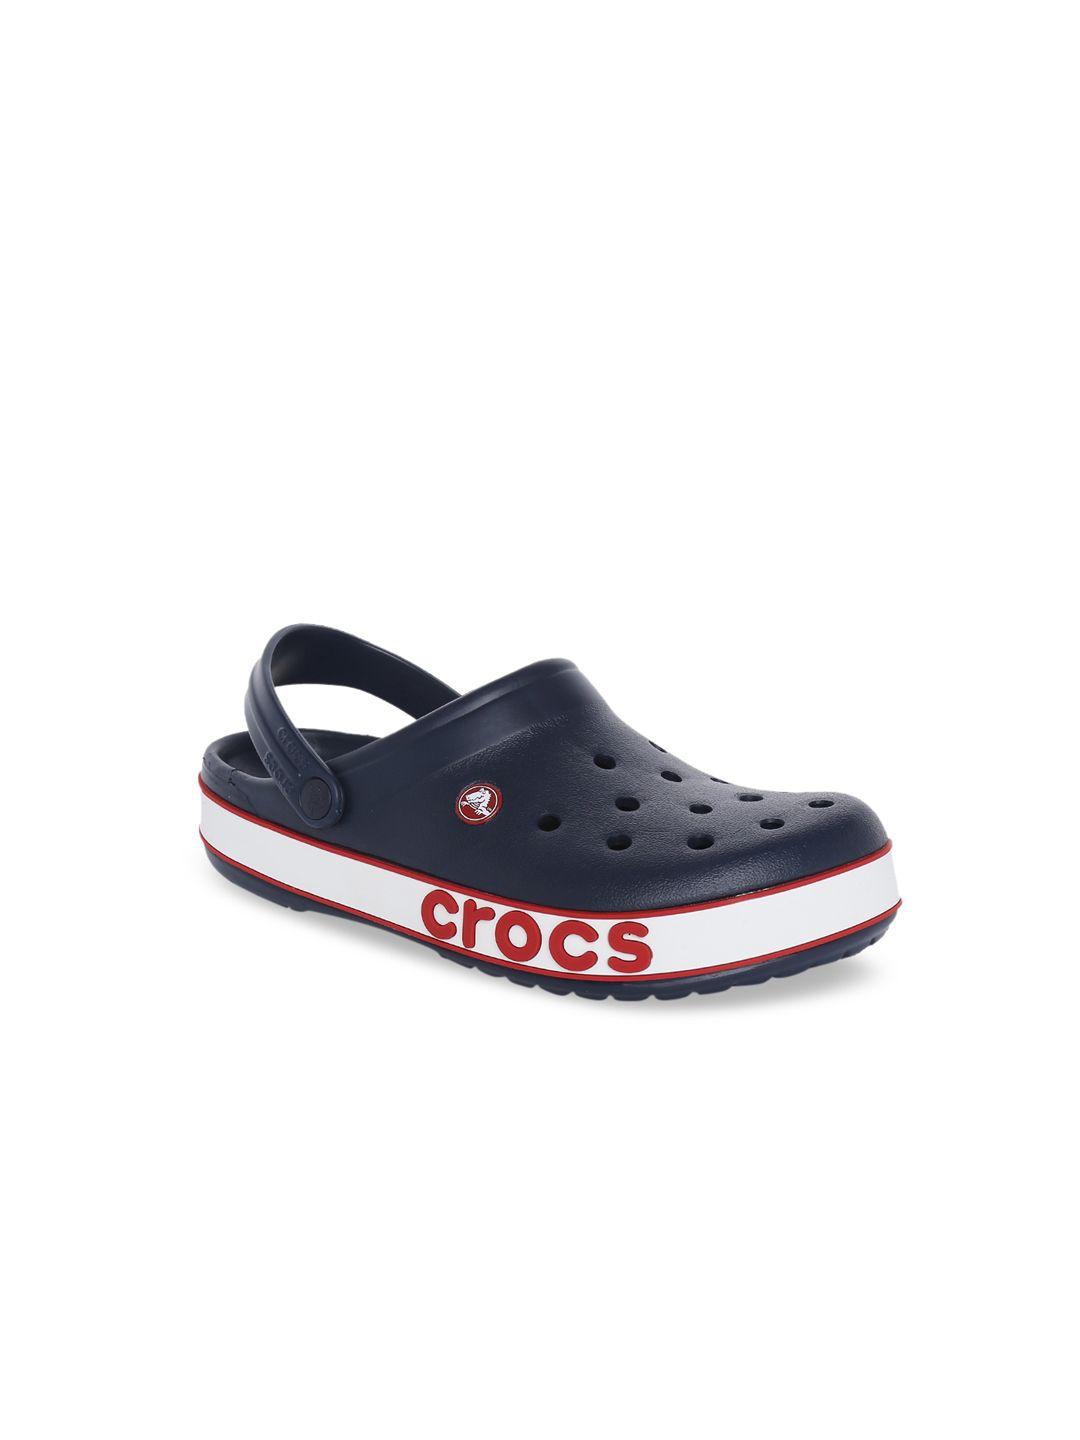 crocs crocband unisex navy blue clogs with cut-outs